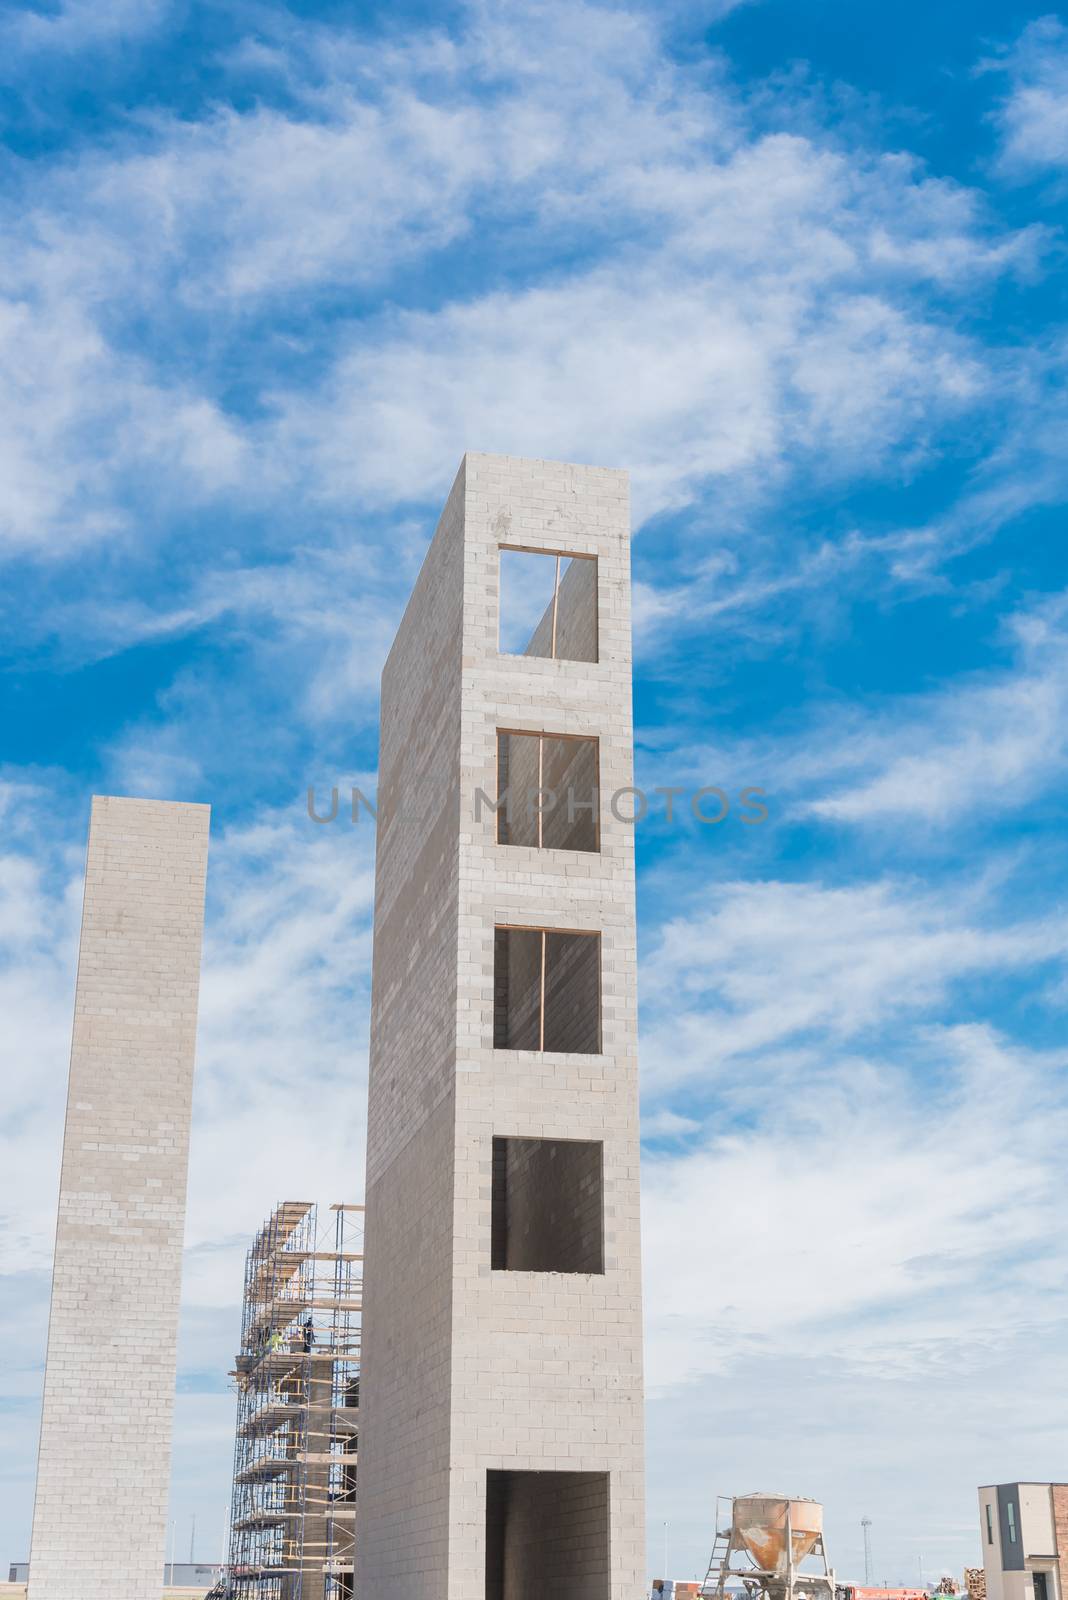 Typical construction site of new condominium building in Texas, America with elevator shaft and metal scaffolding system. Looking up view of concrete elevator tower under cloud blue sky